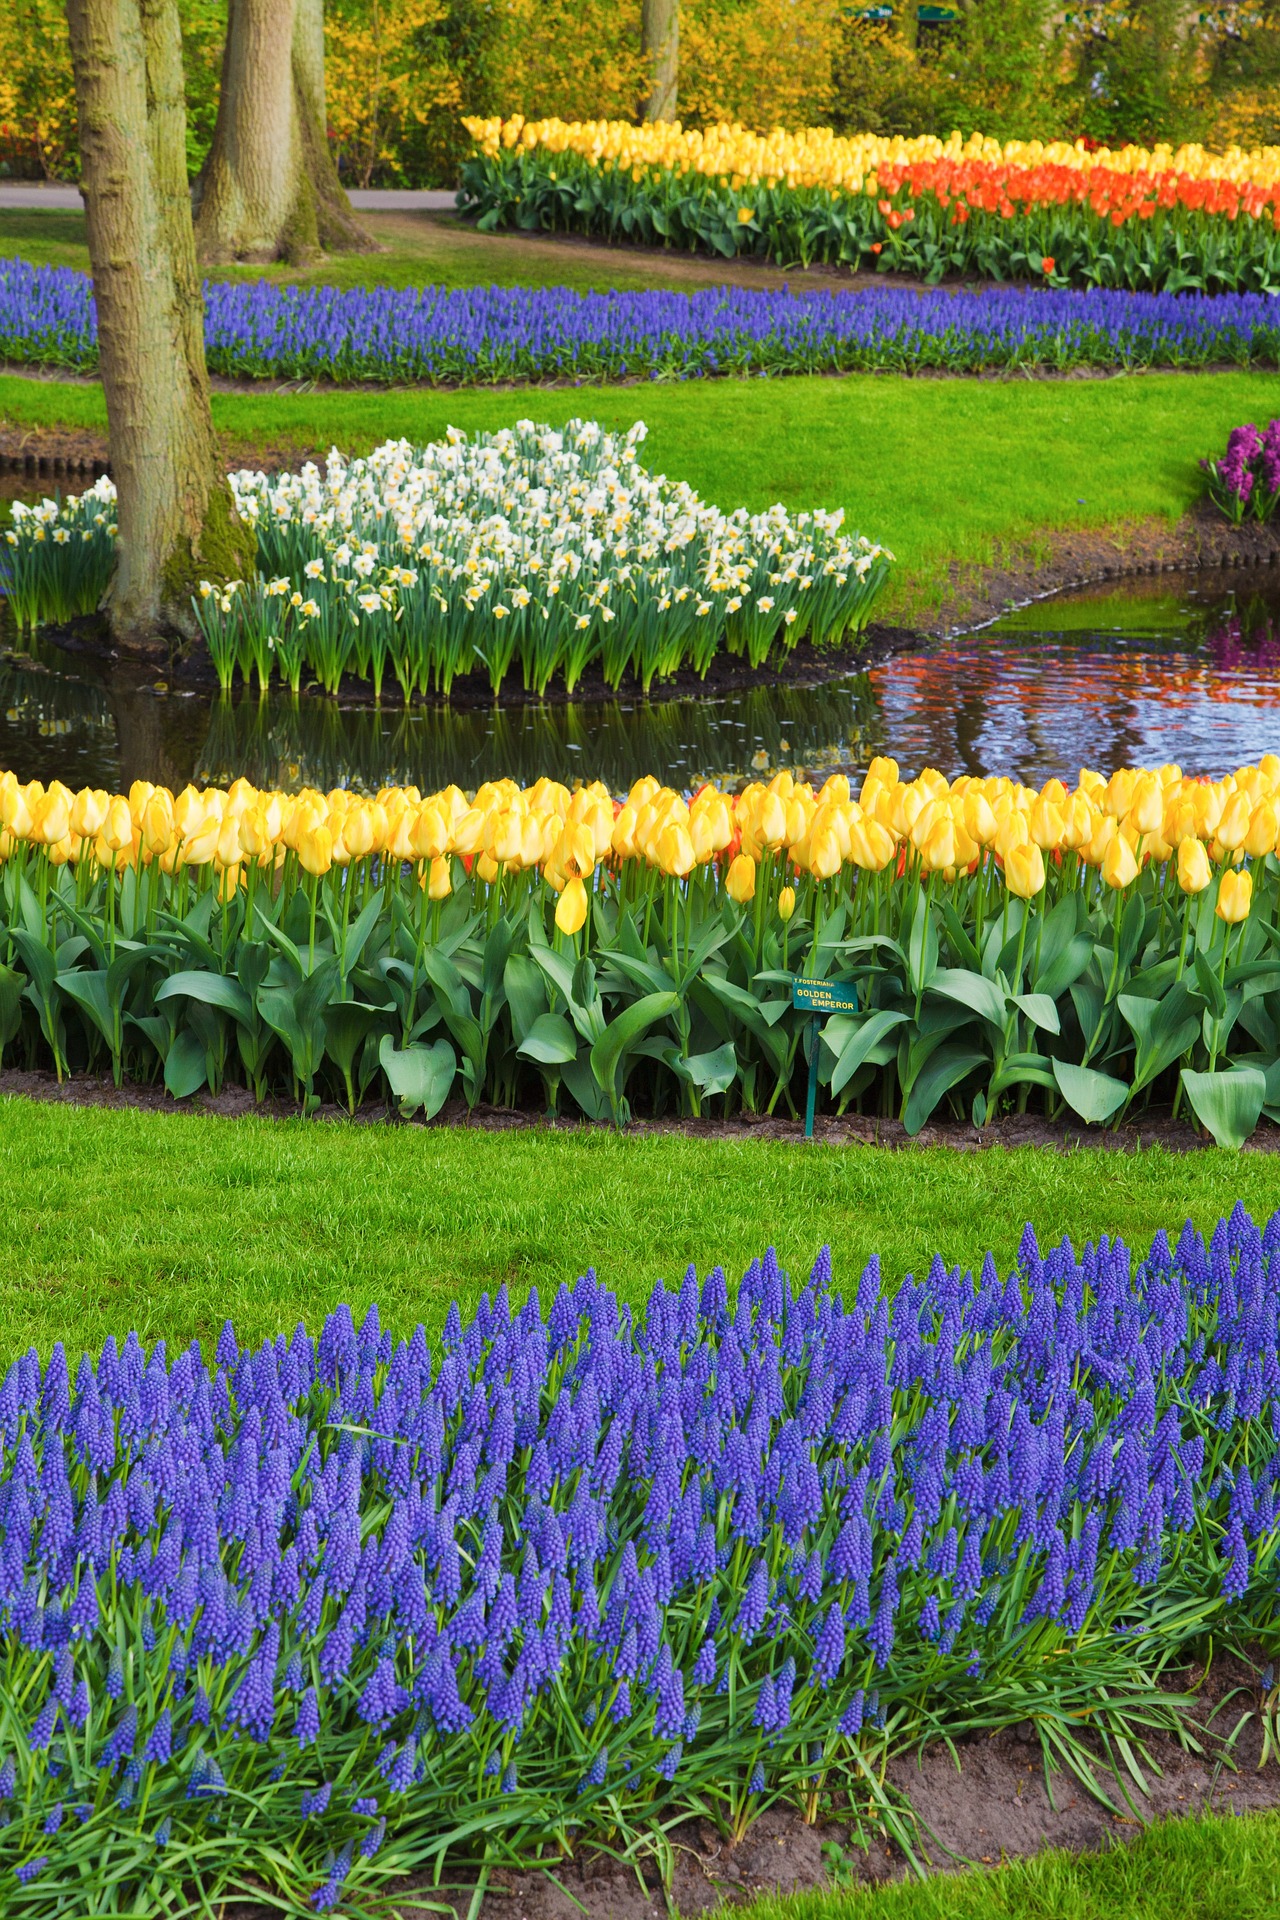 Photograph of manicured garden with tulips, daffodils, and irises